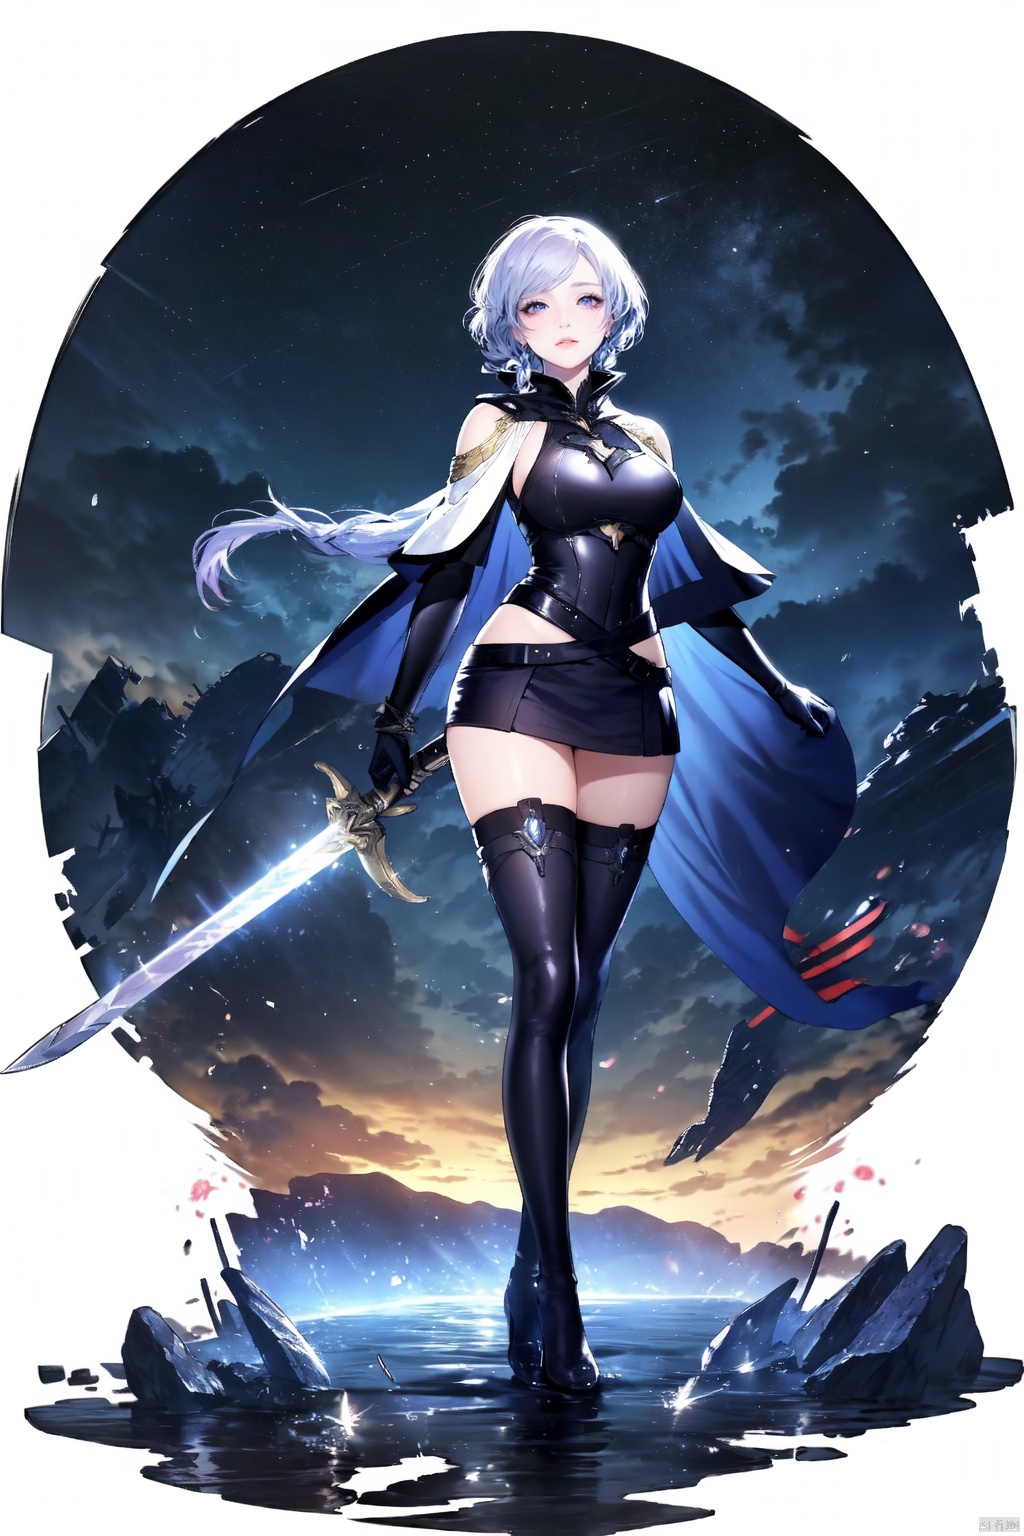 (gacha masterpiece), ((legendary character)), (high-resolution), anime-inspired illustration, original, highly stylized, intricate design . ooo, 1character, solo, full body, set against a lush fantasy world with floating islands and elemental magic, protagonist bearing resemblance to Genshin Impact aesthetics, long flowing silver hair tied in an elegant ponytail, piercing blue-violet eyes reflecting the cosmos, youthful yet determined expression, wearing a regal azure and gold-trimmed battle attire, adorned with celestial motifs and shimmering gemstones, armored pauldrons, gauntlets and greaves intricately etched with arcane patterns, wielding a dual-elemental sword that channels both water and lightning energies, sheathed at their hip, equipped with a magical artifact bracelet on one wrist, knee-high boots blending seamlessly into form-fitting leggings, standing poised with a light breeze billowing their cape, ready to embark on a grand adventure, exuding a blend of grace and power., ((poakl)), azur lane